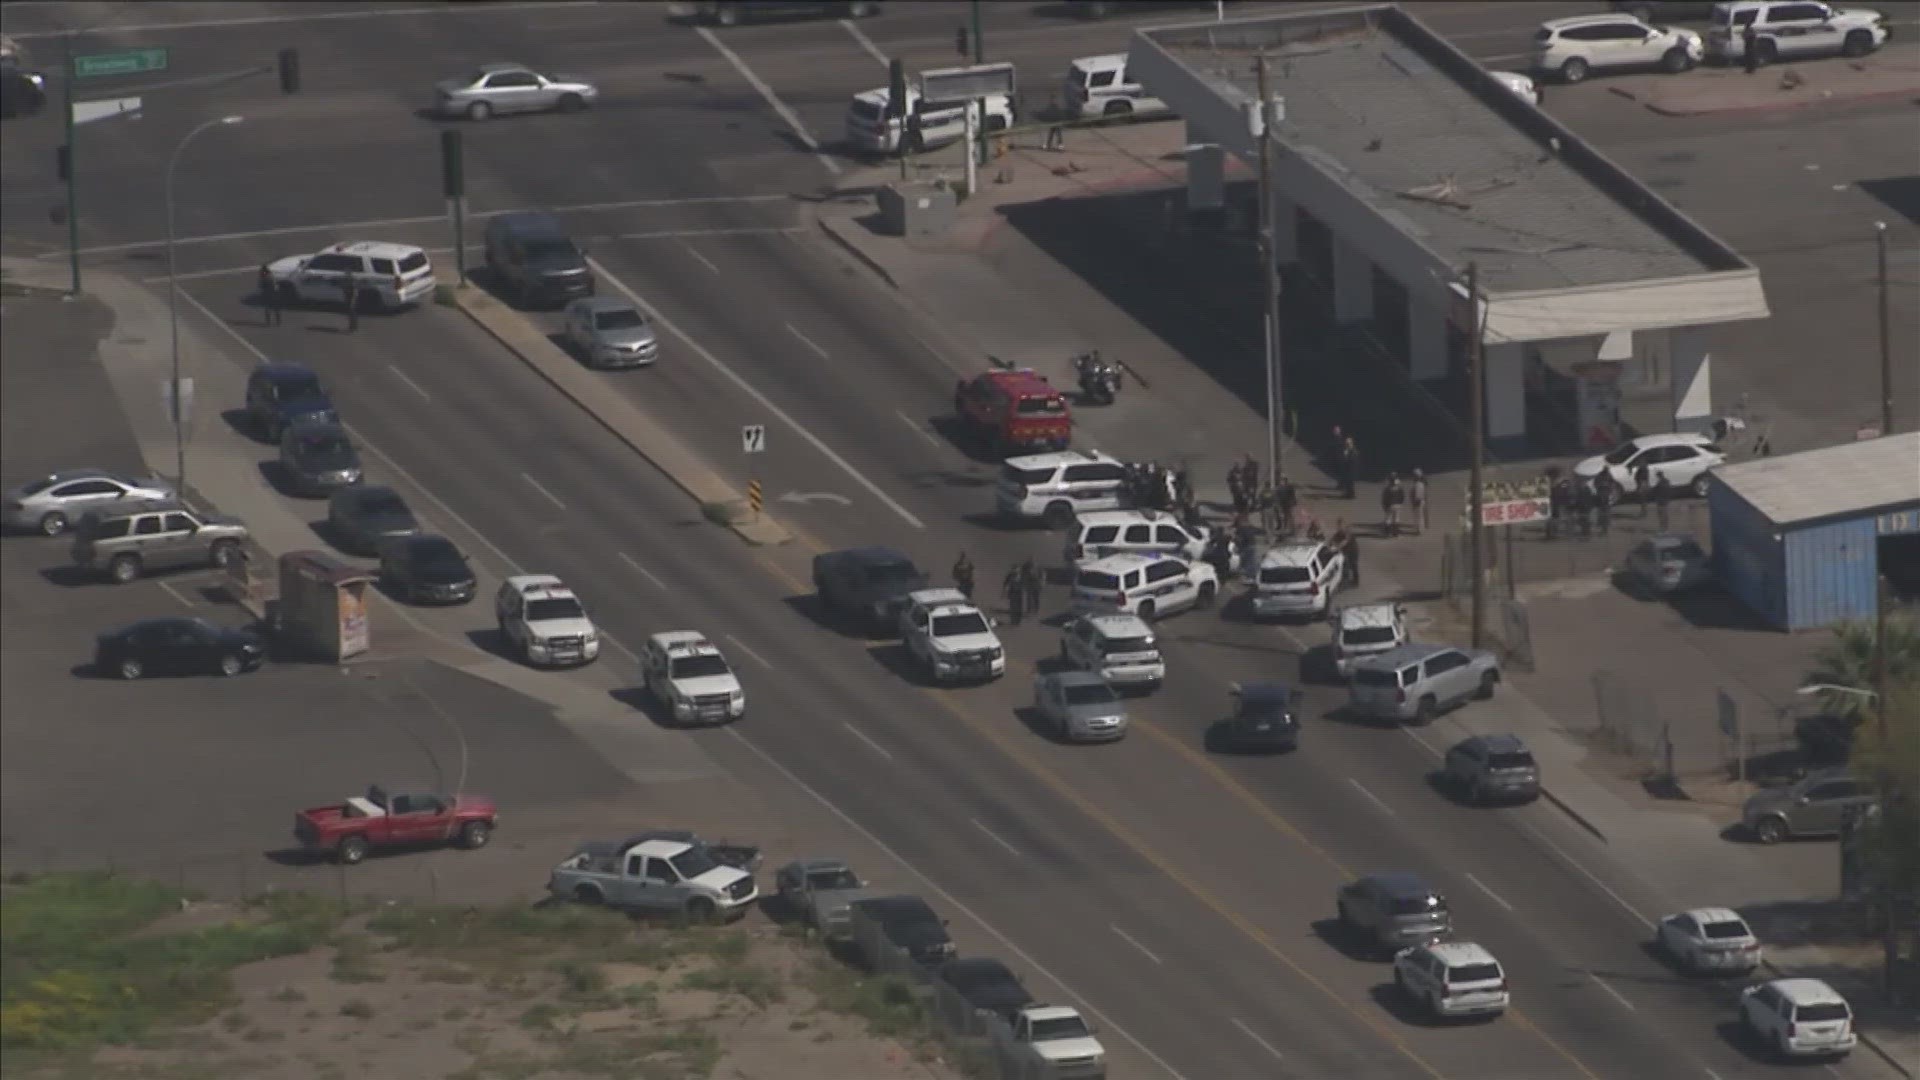 Traffic will be restricted near 9th and Atlanta avenues in south Phoenix as police investigate an incident they're calling a "violent and unprovoked attack."